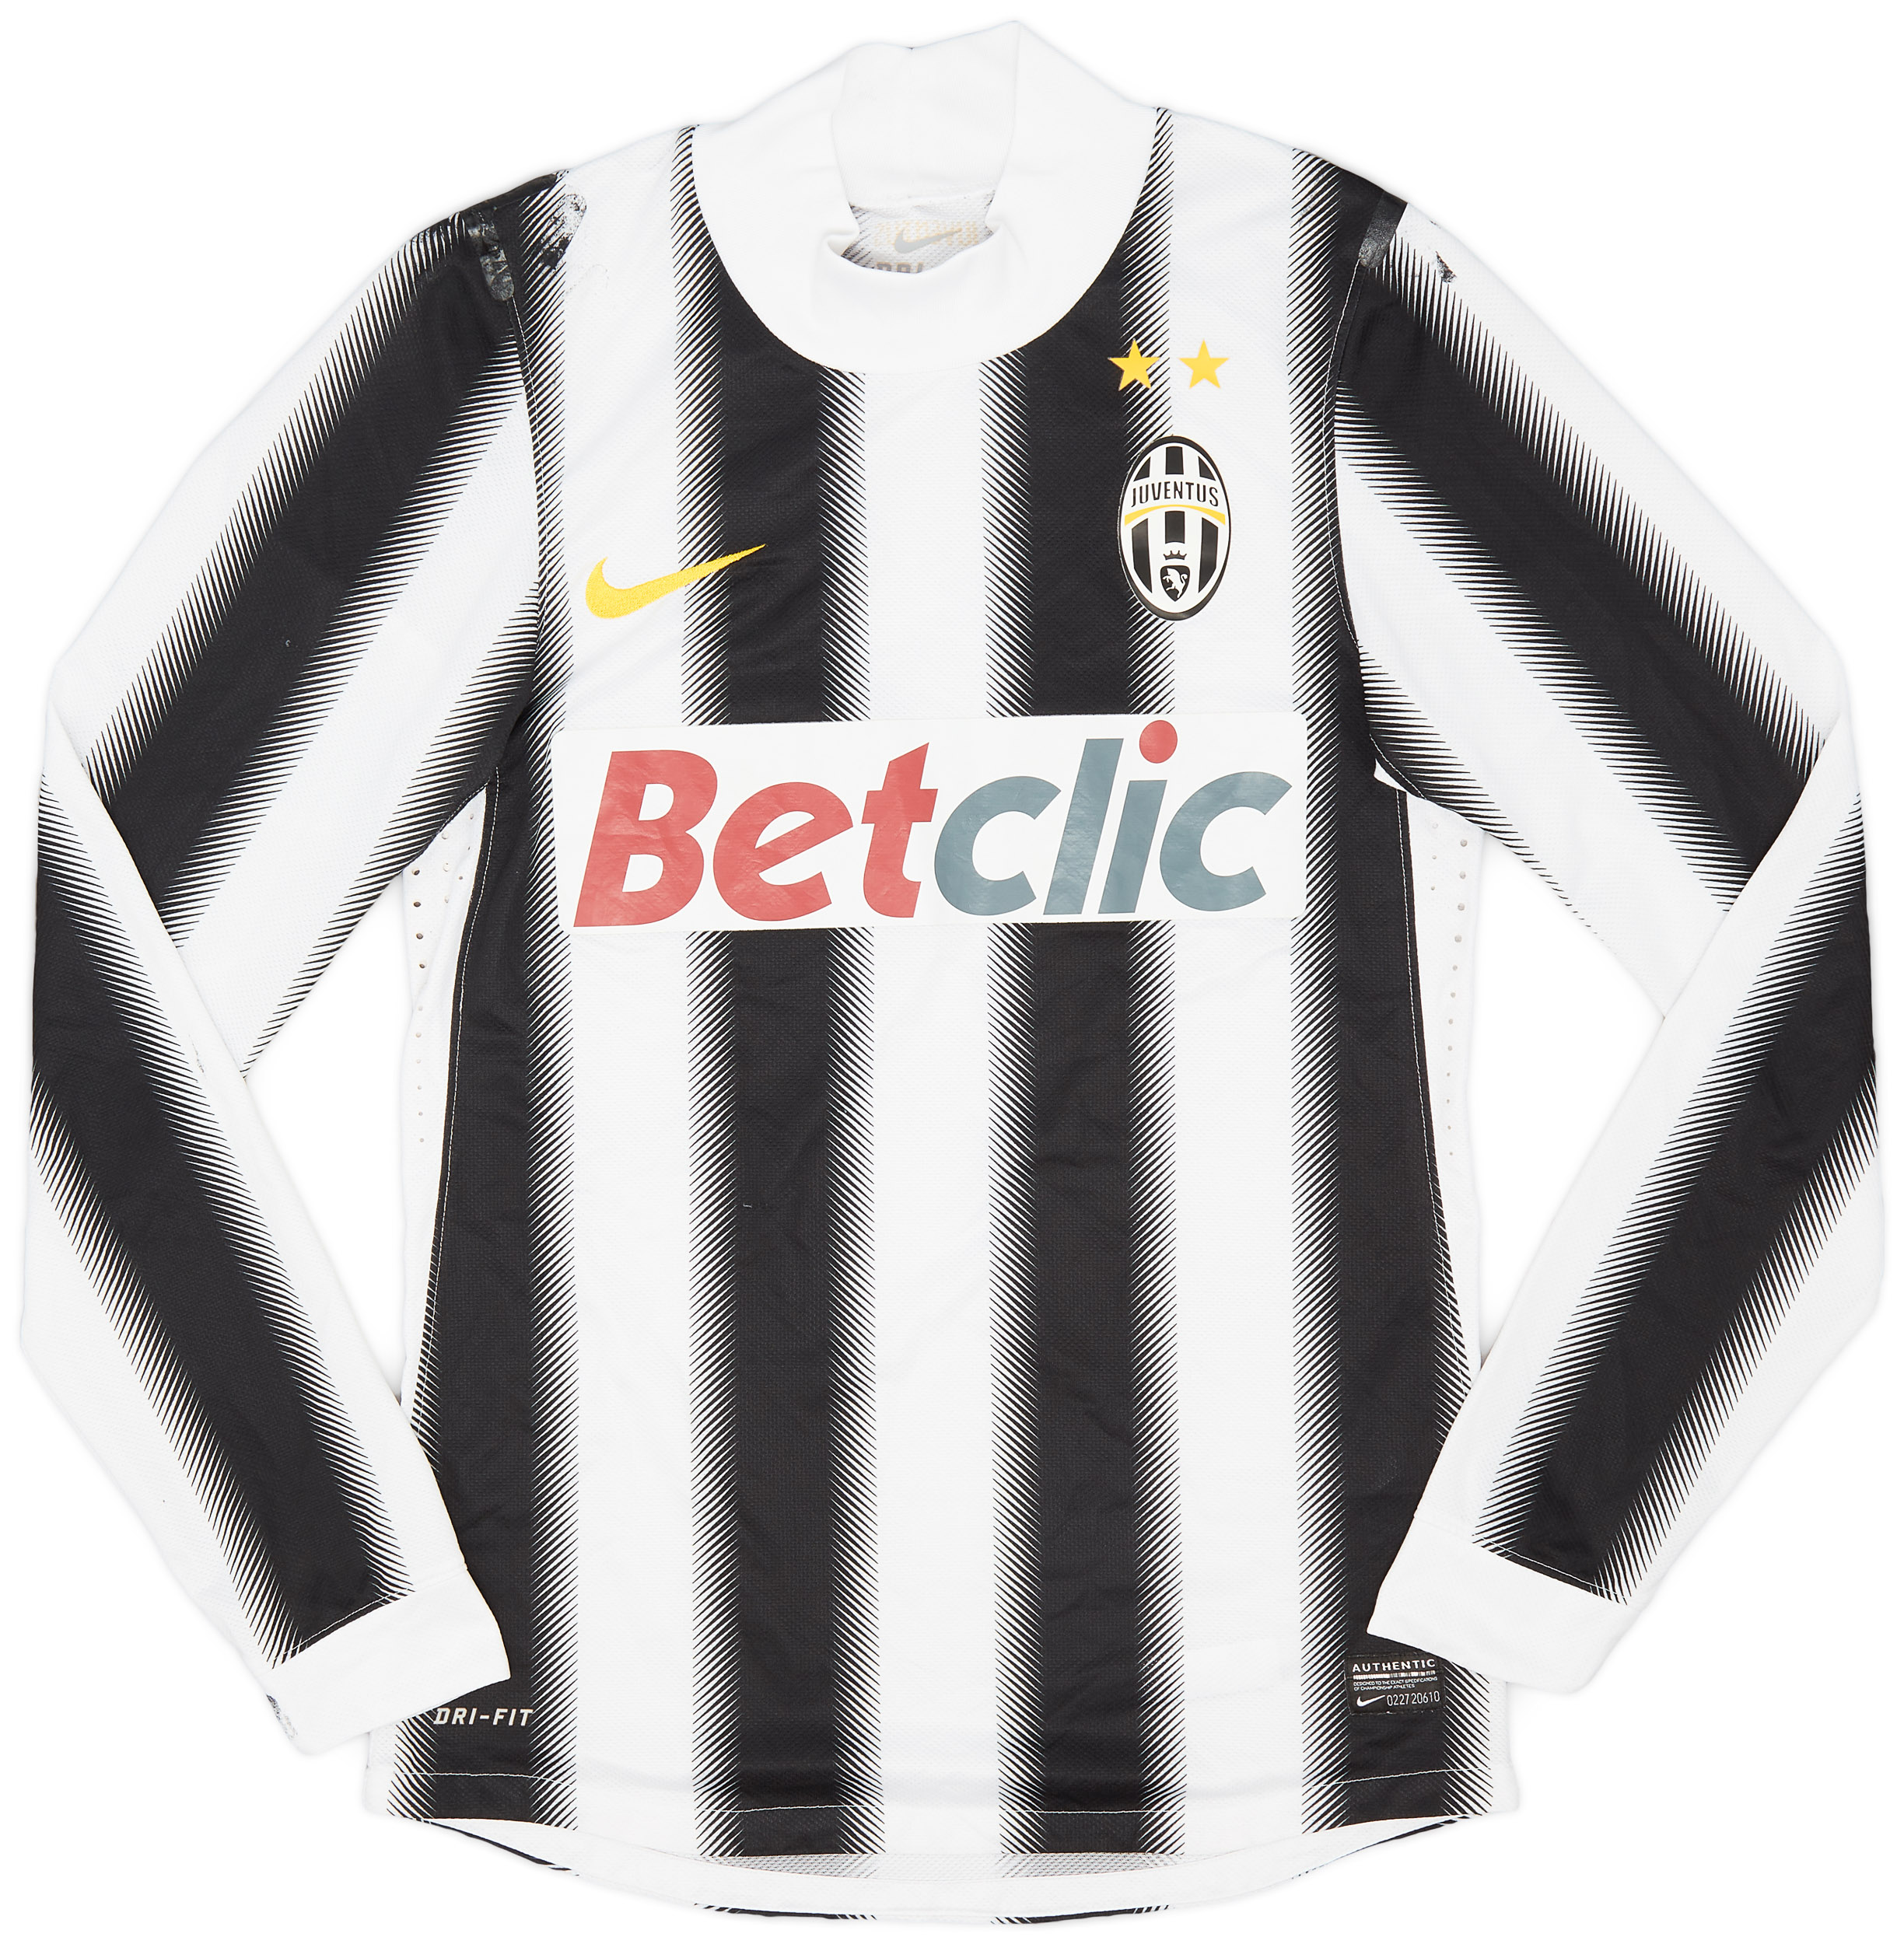 2011-12 Juventus Player Issue Home Shirt - 5/10 - ()